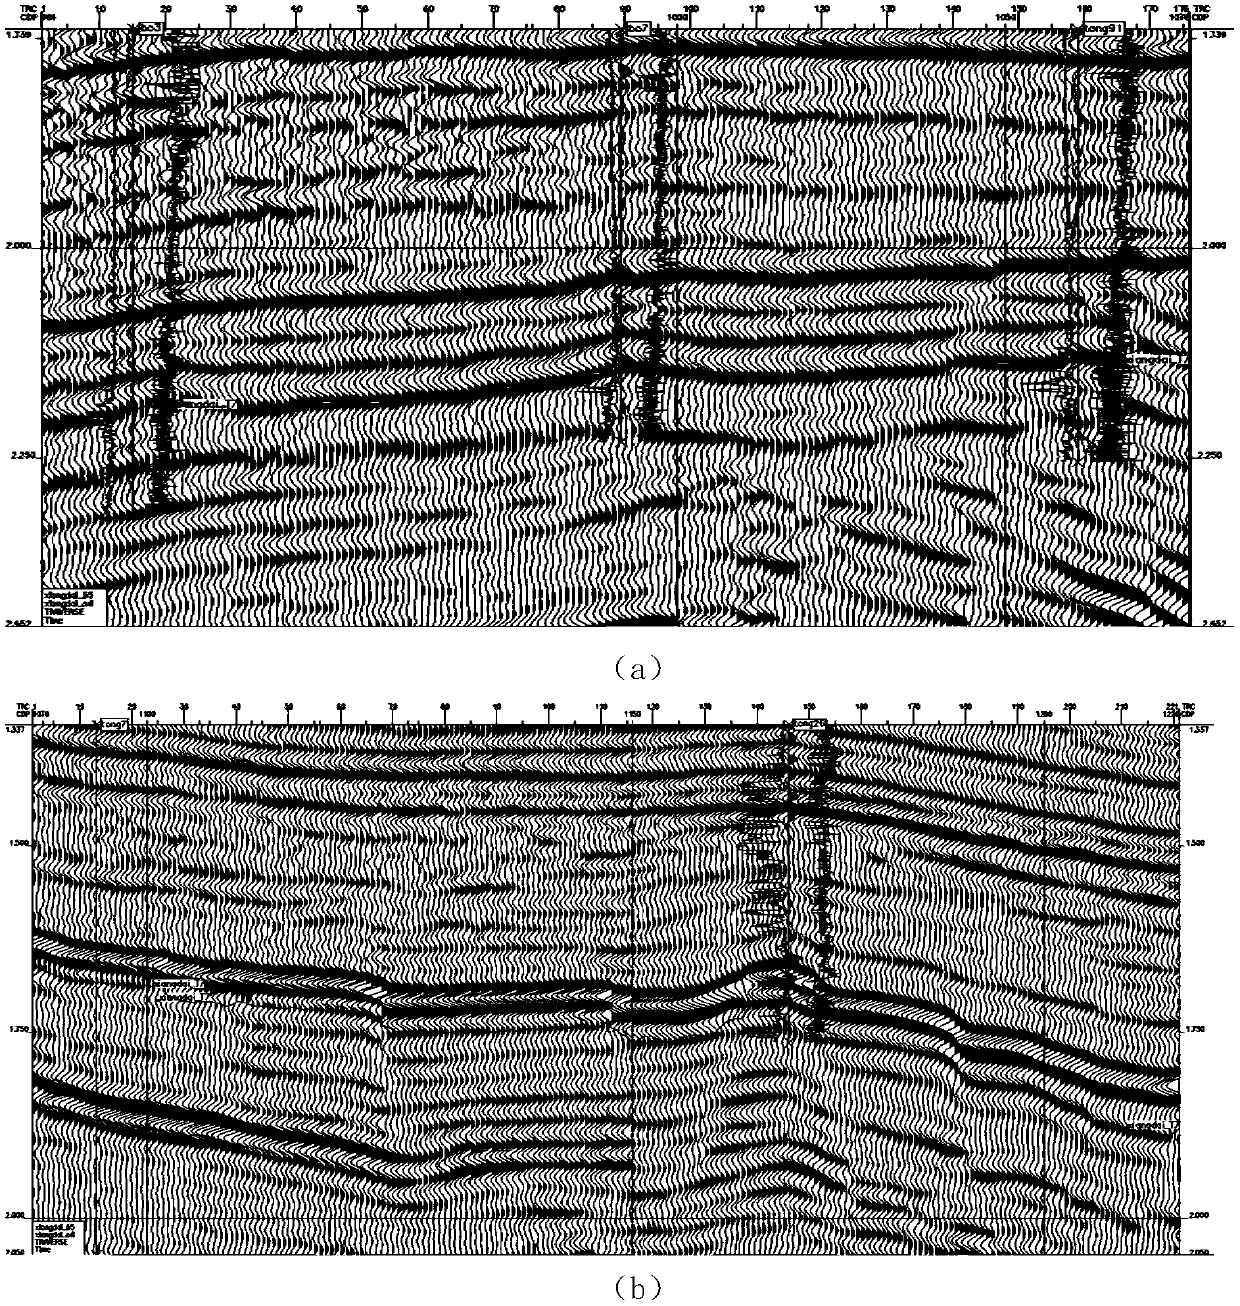 Earthquake strong shielding time-frequency information extraction and stripping method based on phase control